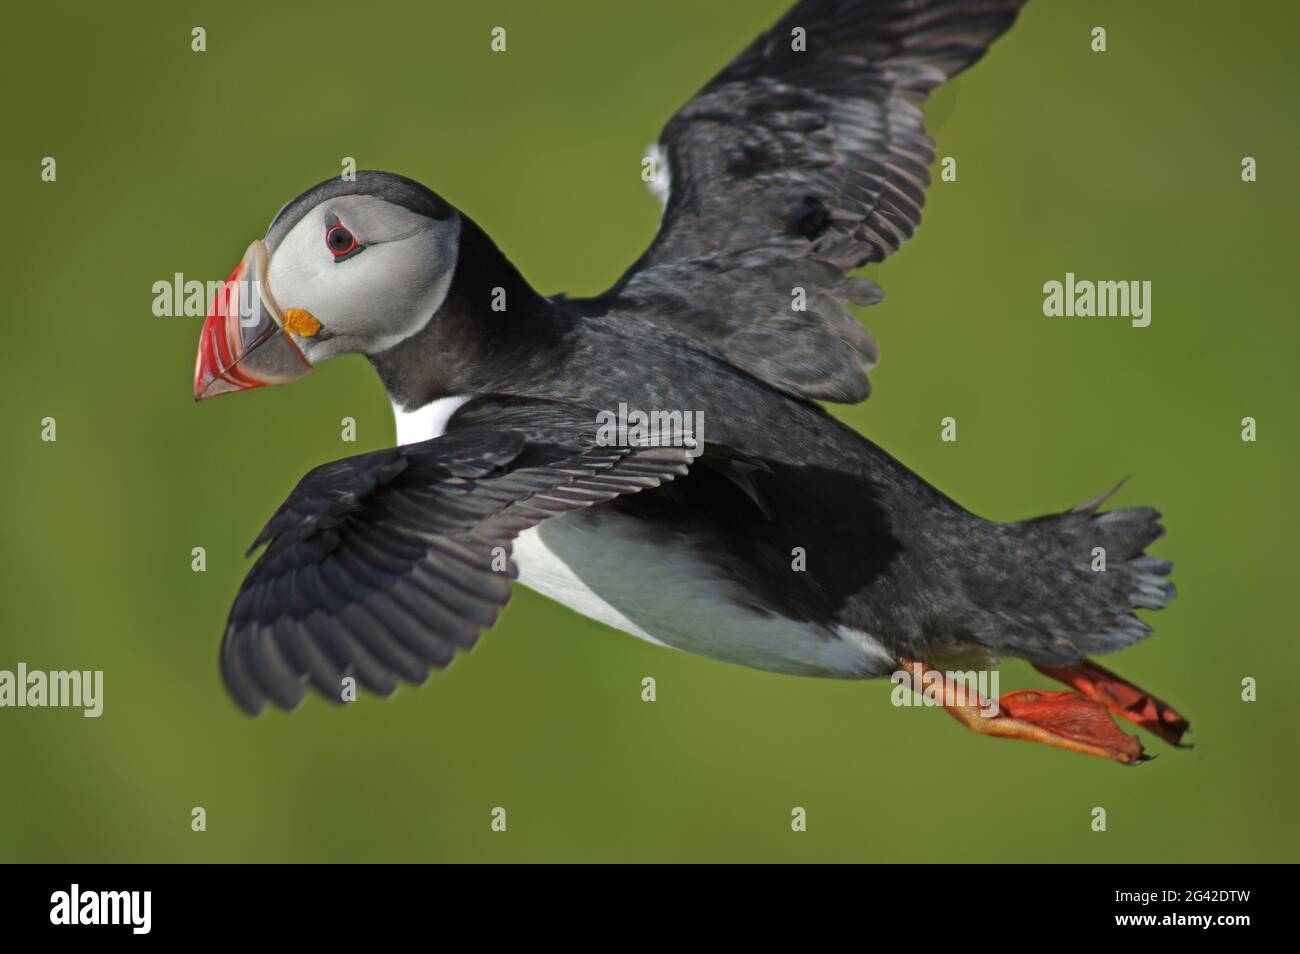 Puffin in action Stock Photo